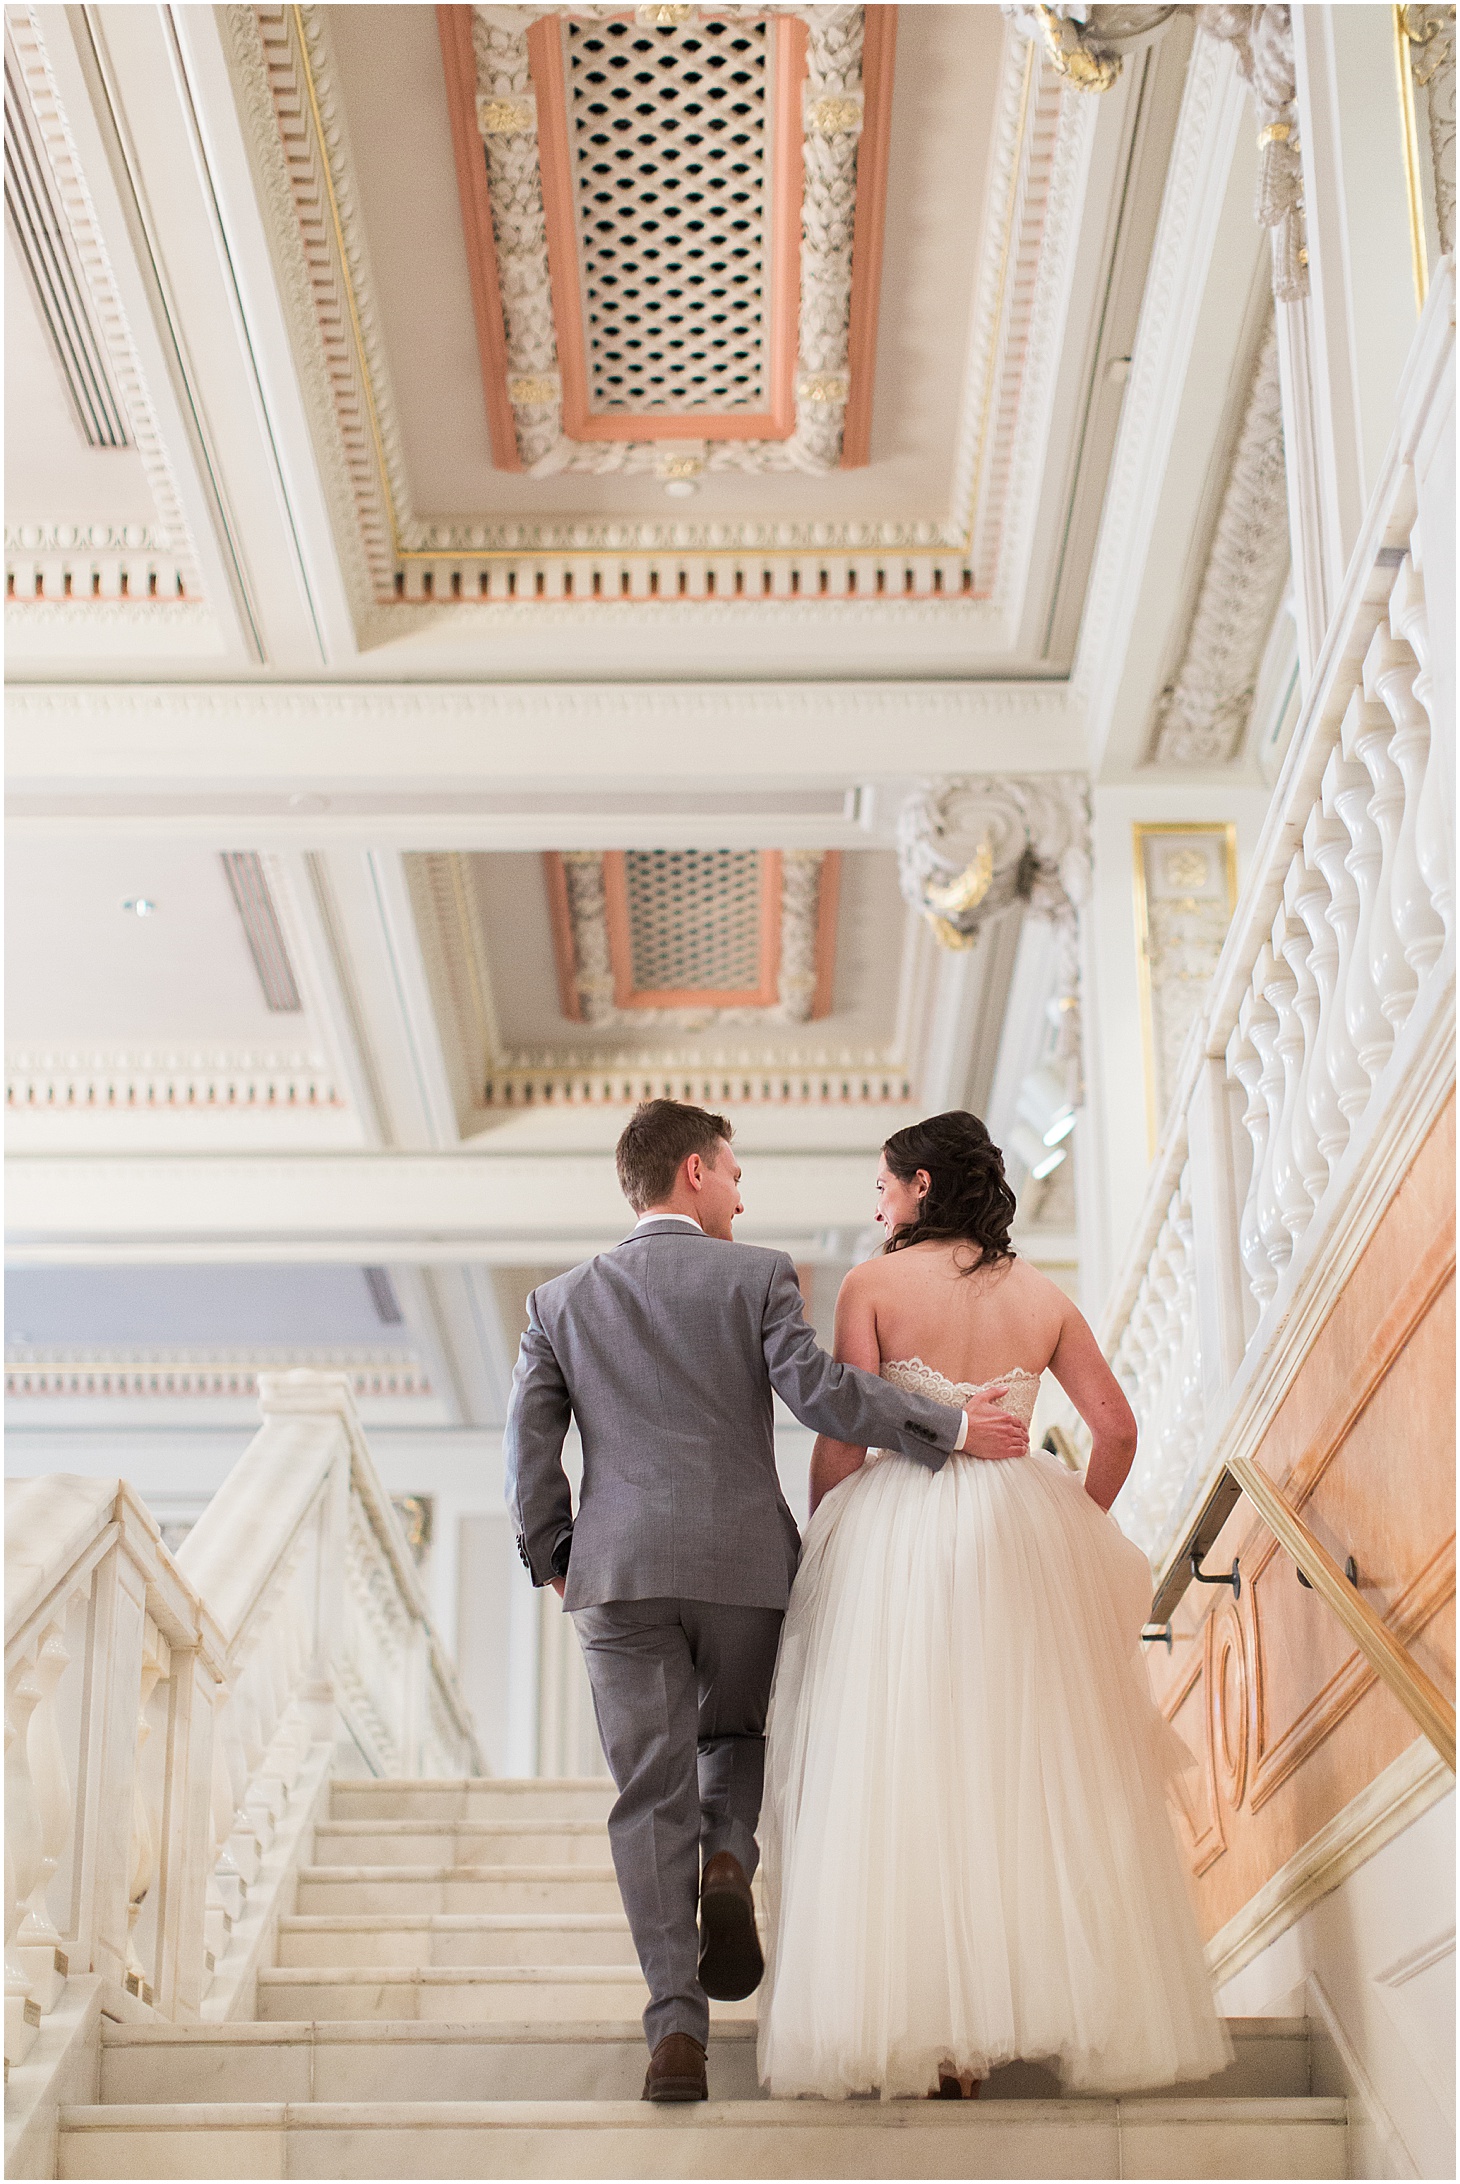 Wedding Portraits at National Museum of Women in the Arts, Kimpton Donovan Hotel, Dusty Blue and Pink Jewish Wedding at Women in the Arts, Sarah Bradshaw Photography, DC Wedding Photographer 